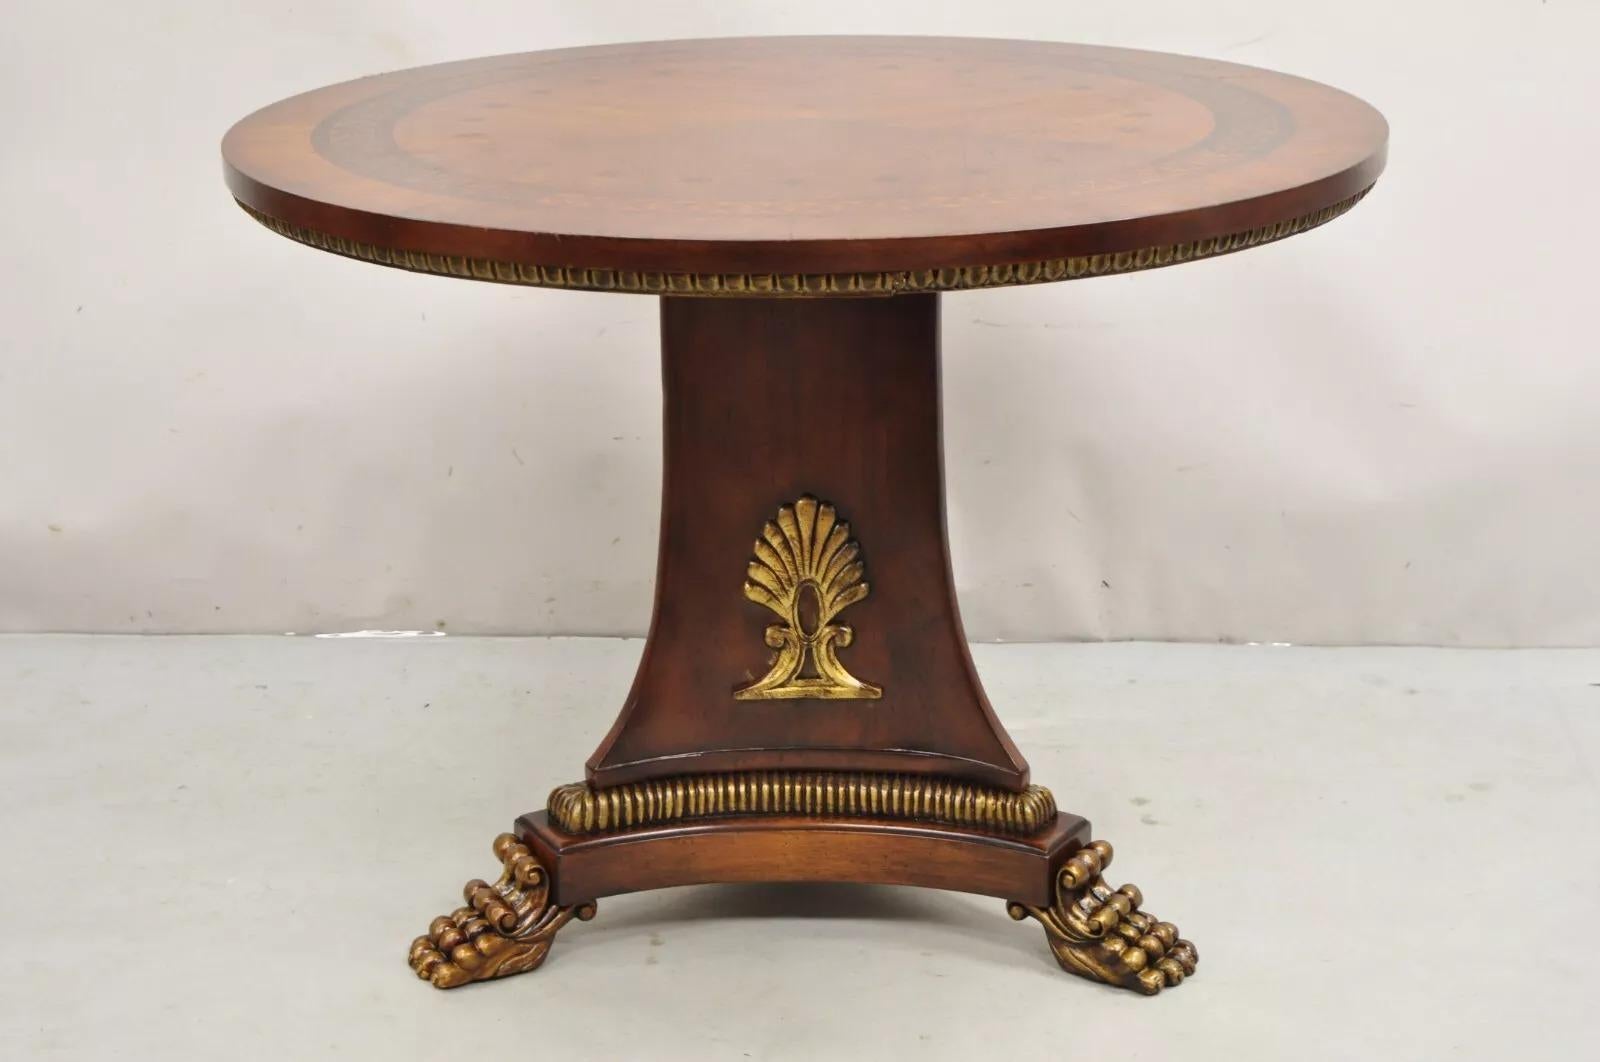 Italian Regency Style Marquetry Inlay Paw Feet Pedestal Base Round Center Table For Sale 7